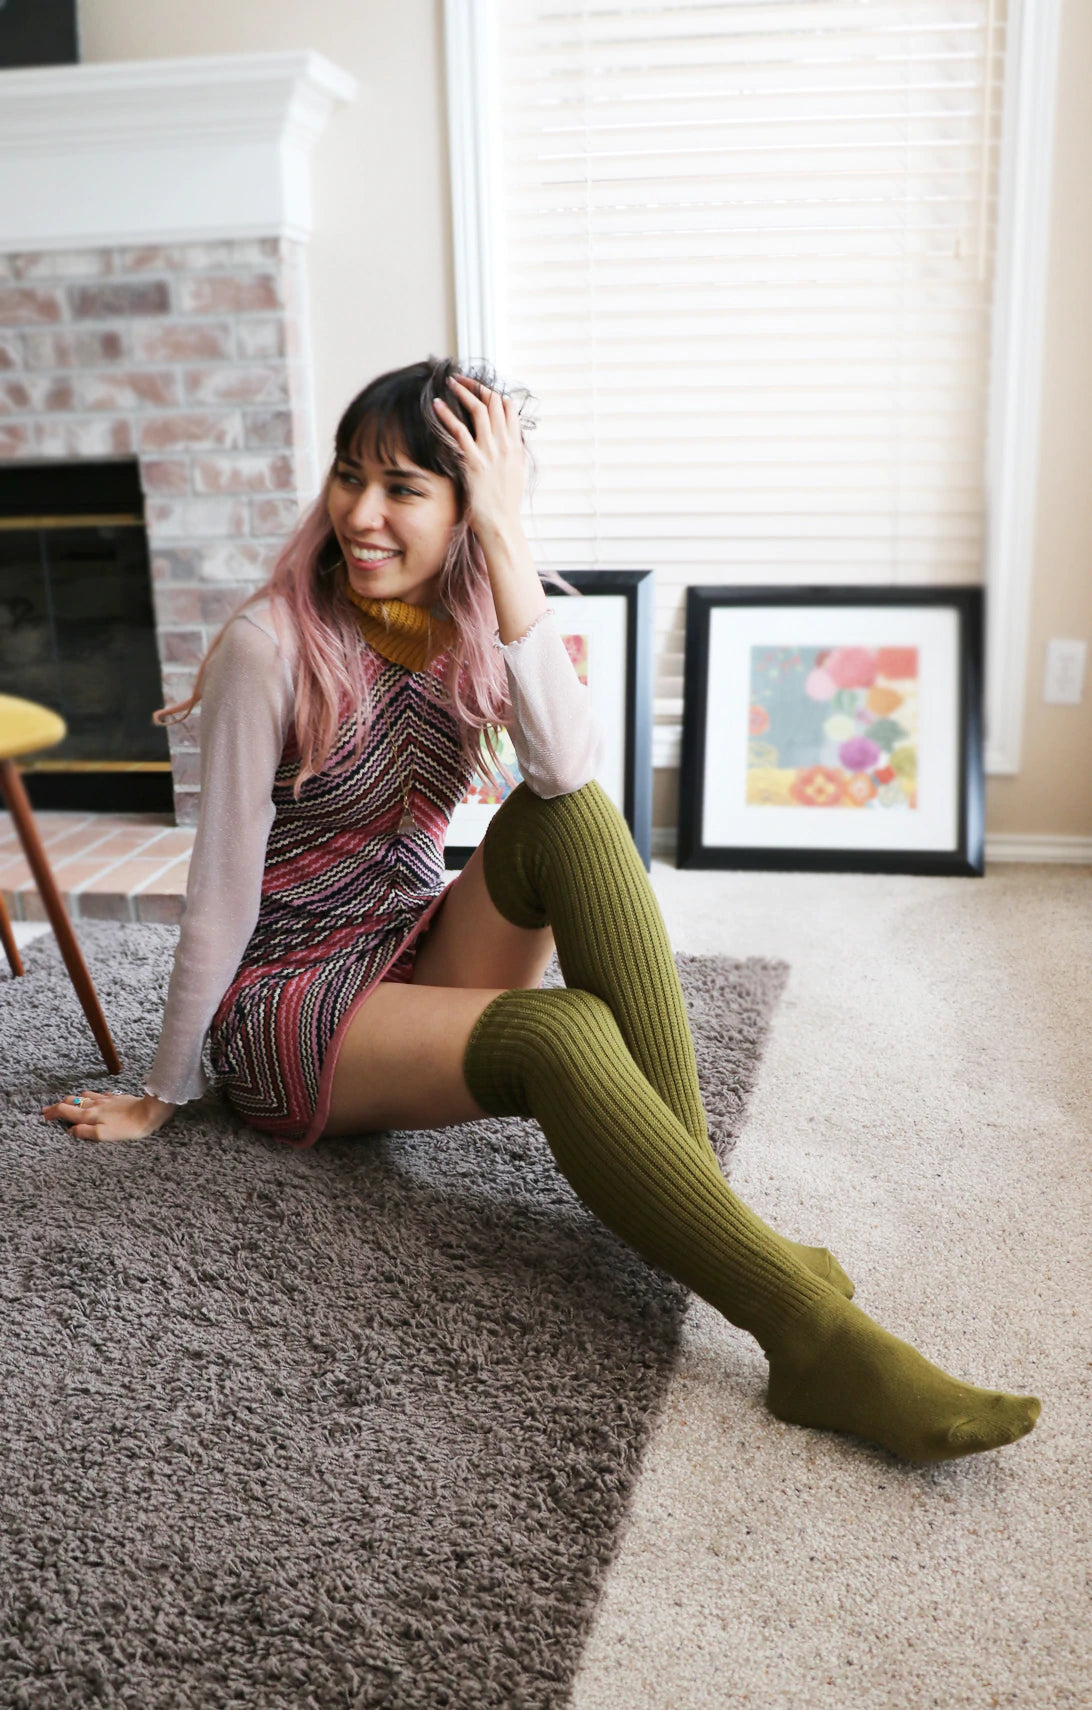 What's the difference between knee highs, otks, and thigh highs